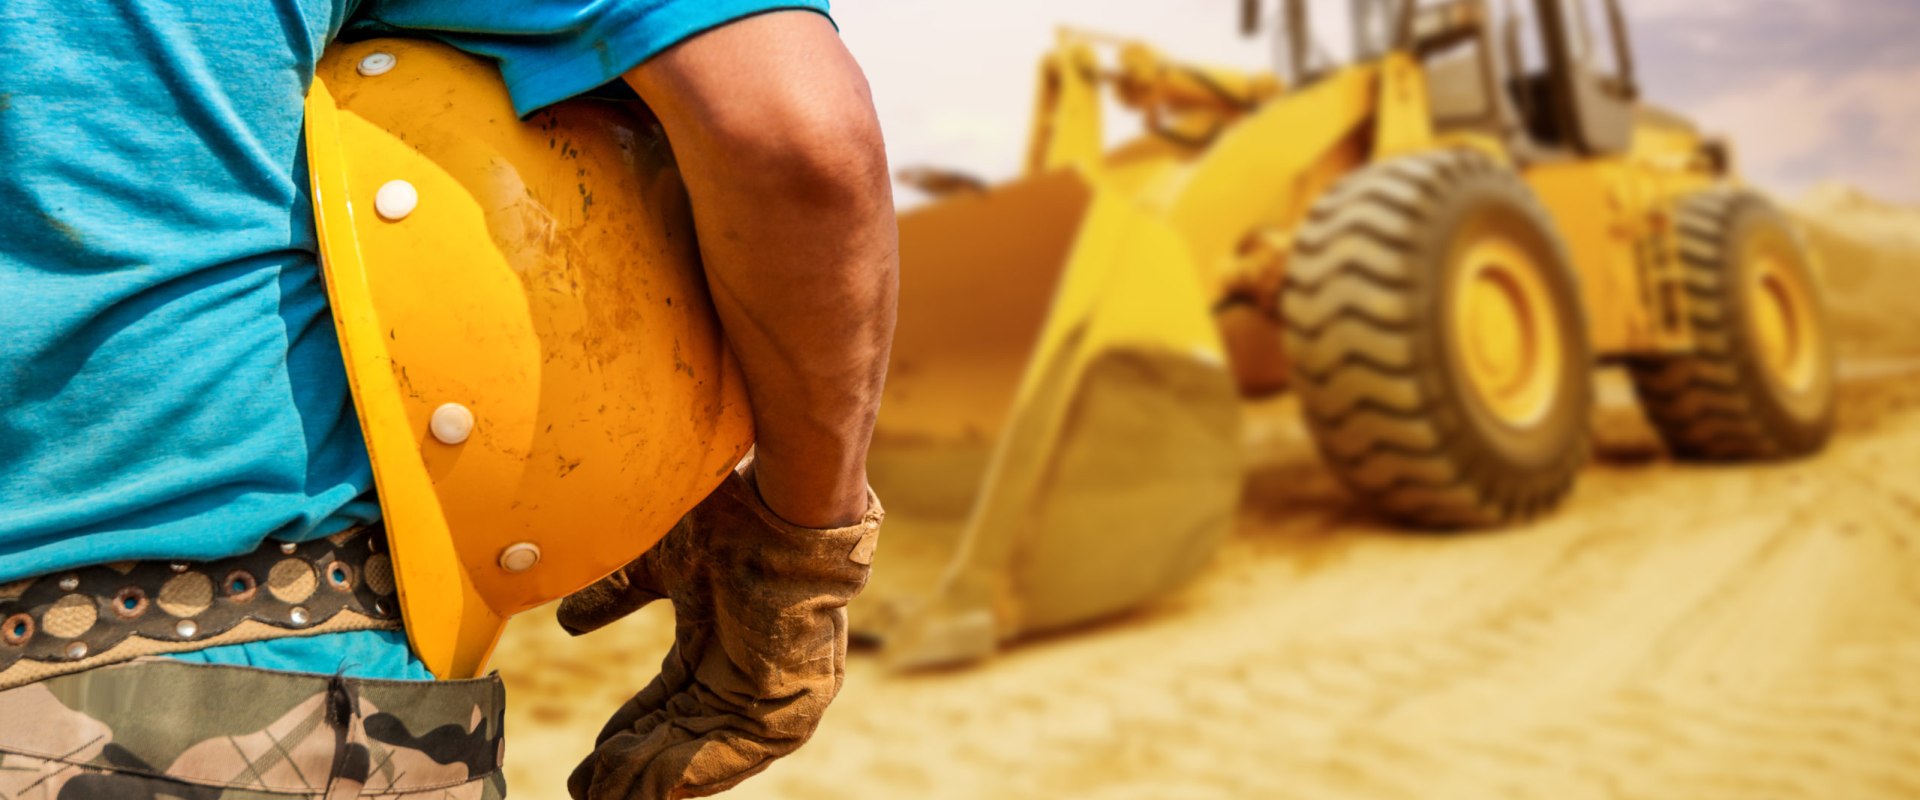 10 Strategies to Optimize Maintenance for Construction Equipment